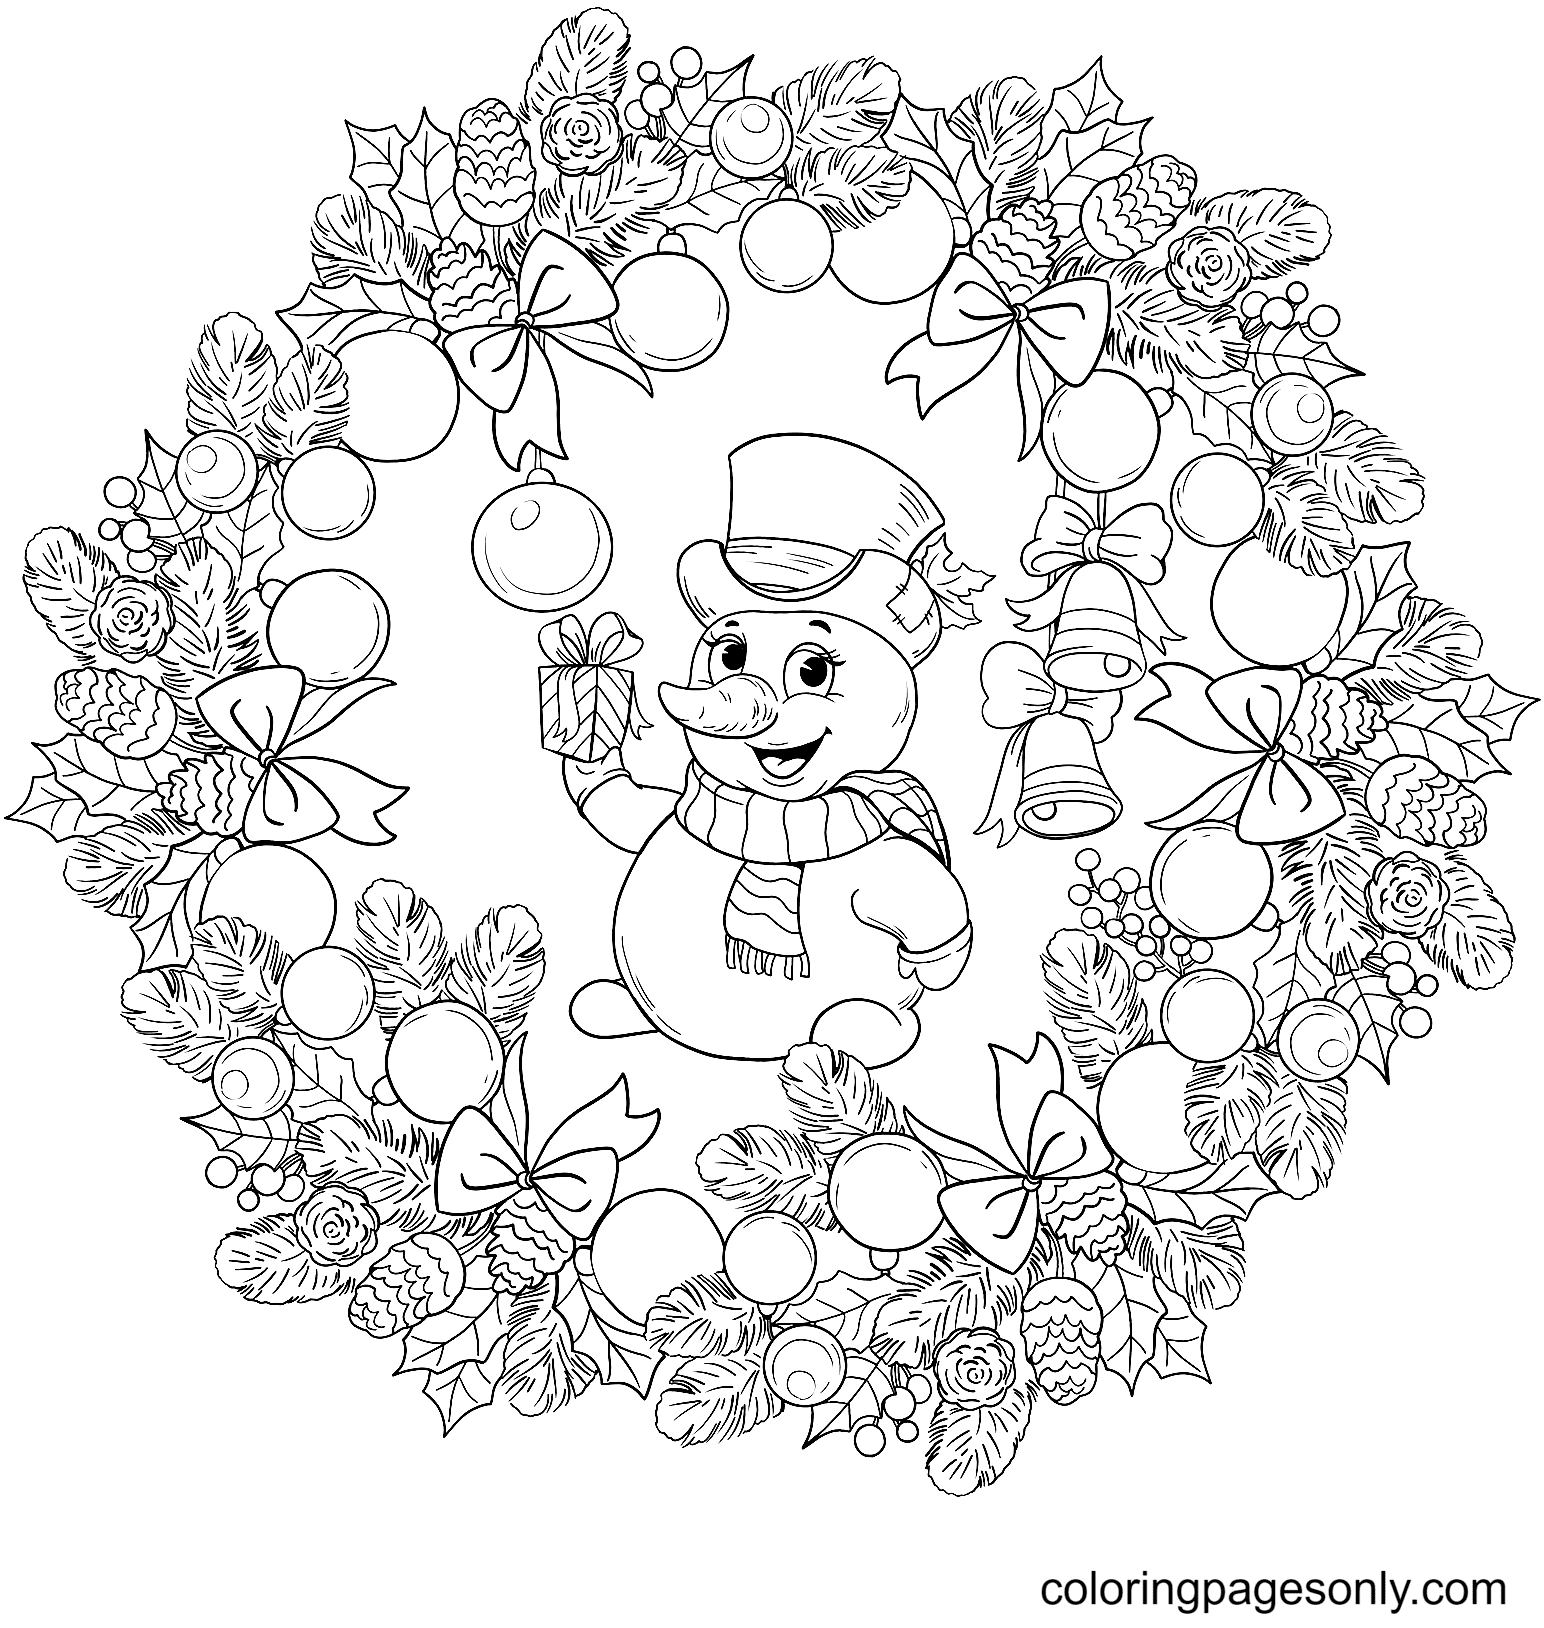 Mandala Christmas Ornament and Cute Snowman Coloring Pages